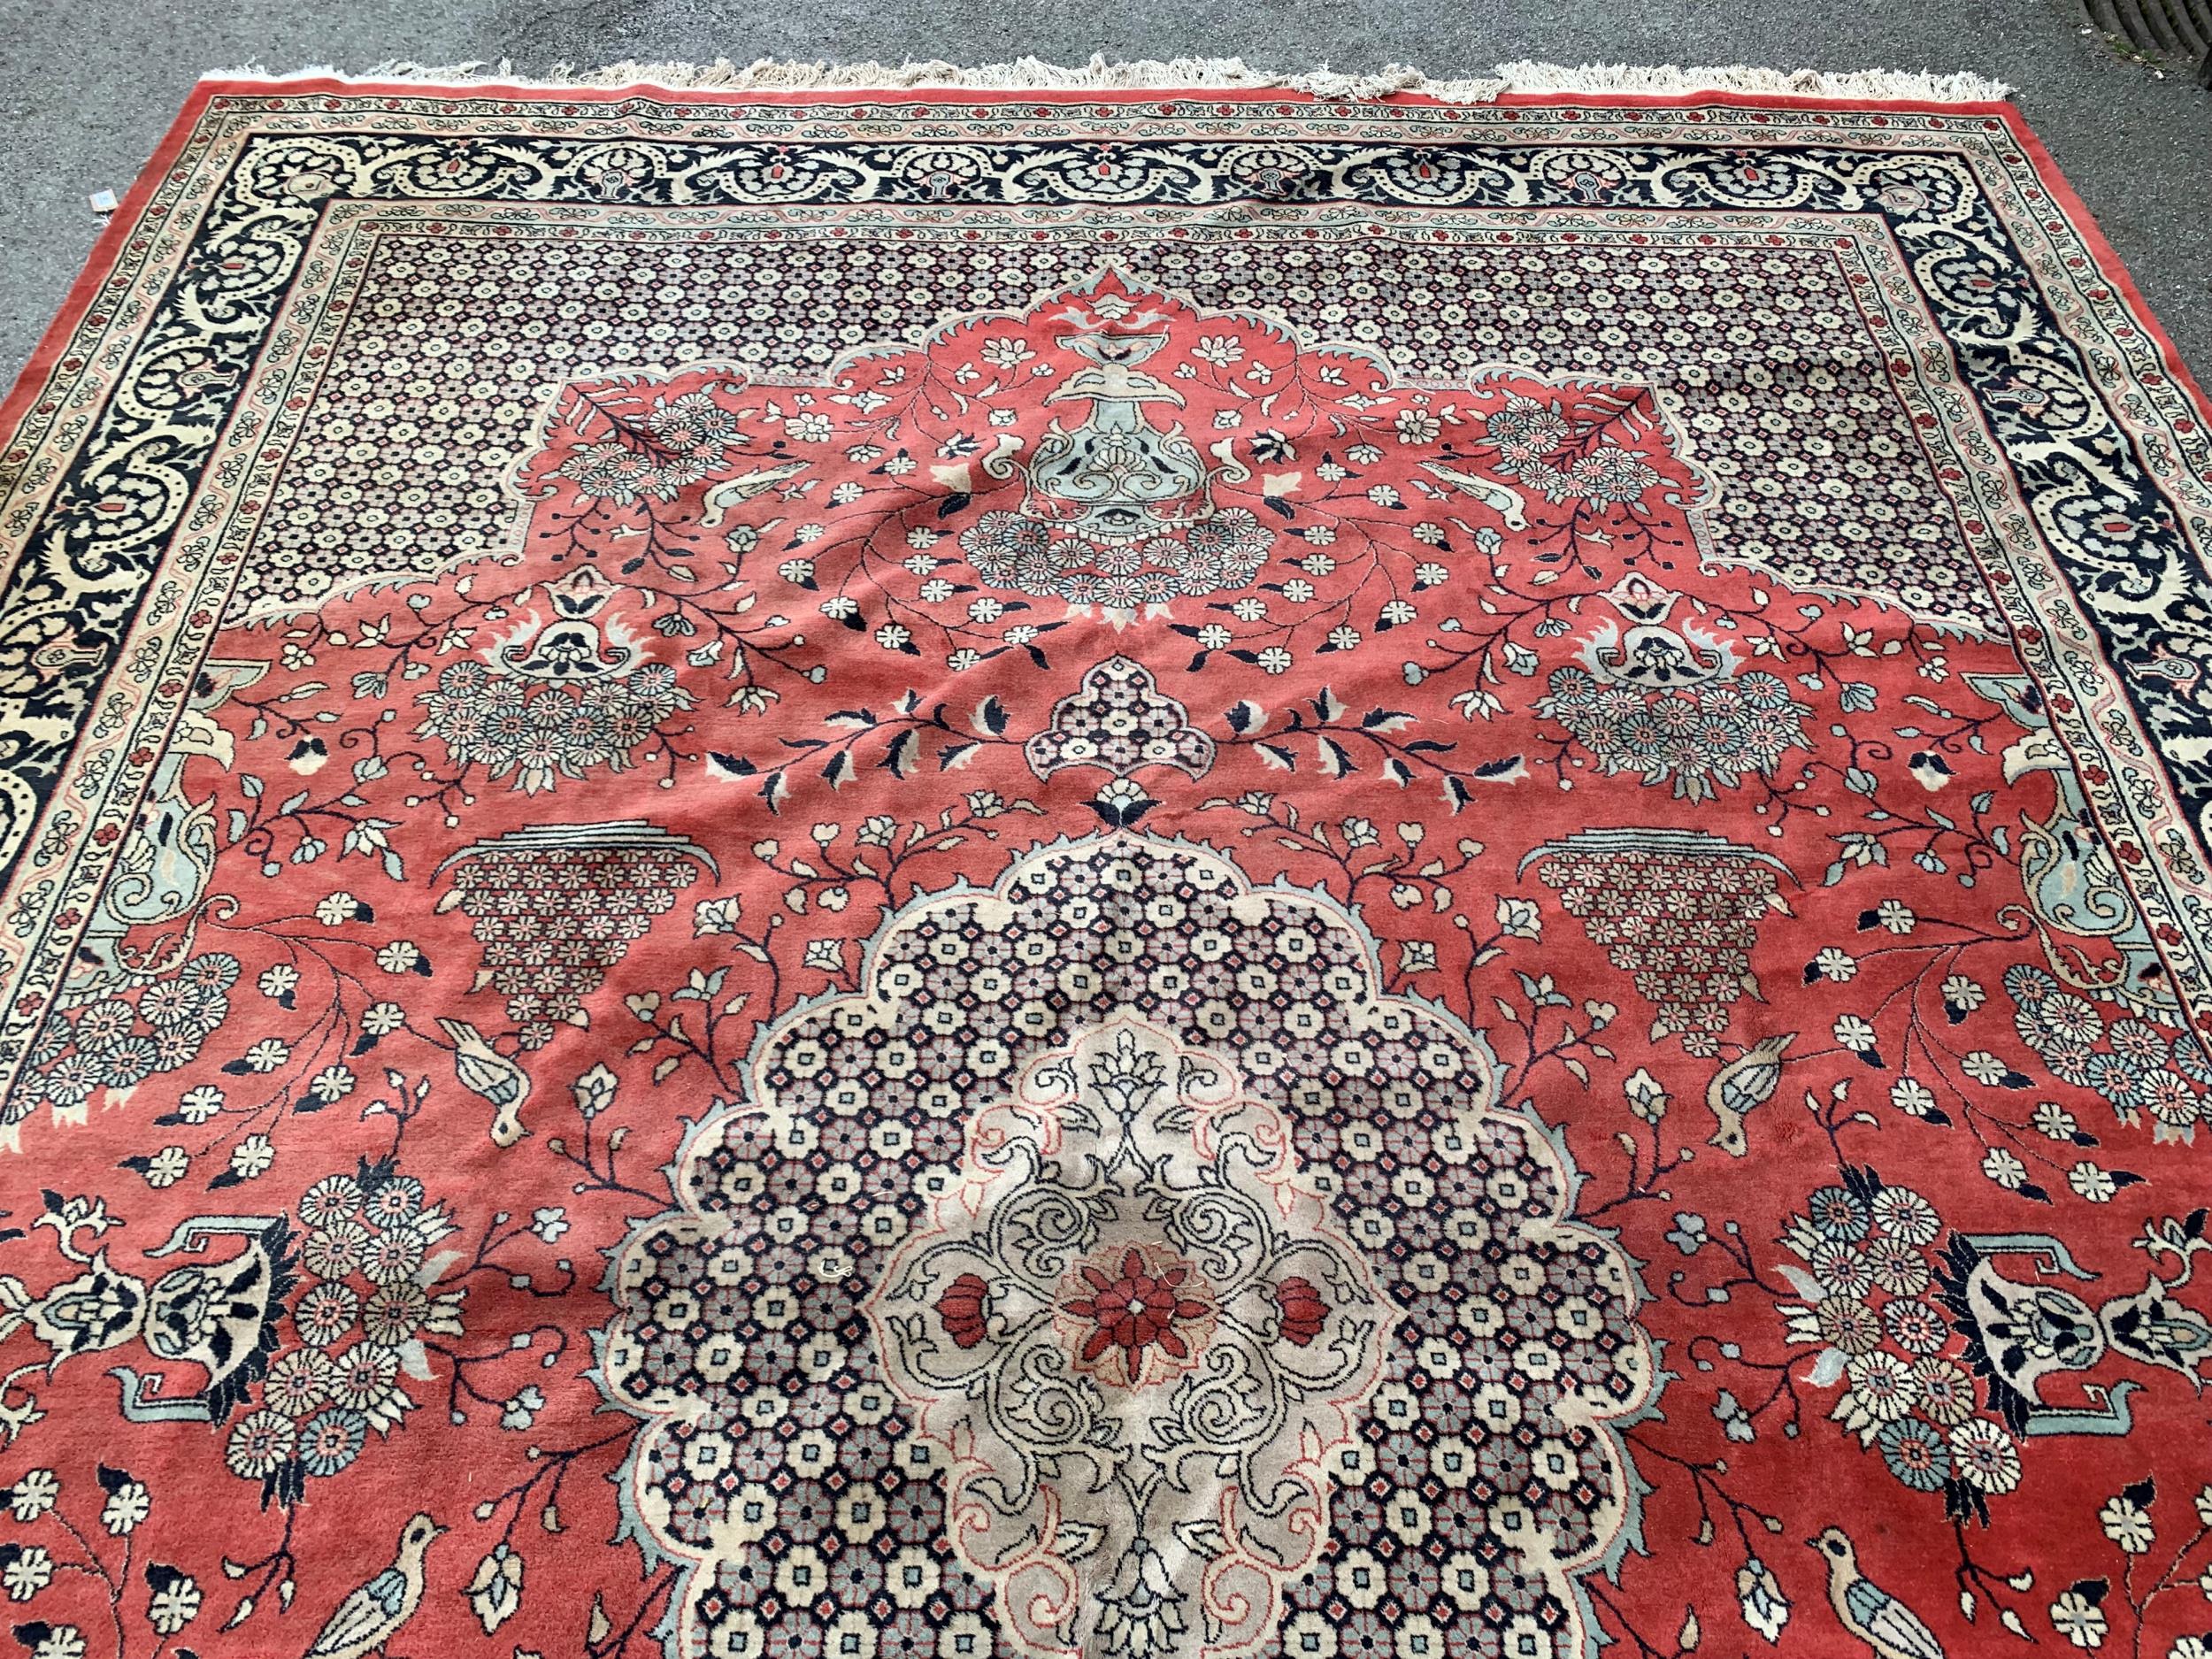 Large Indo Persian carpet with a medallion and vase design on a salmon ground with corner designs - Image 3 of 5